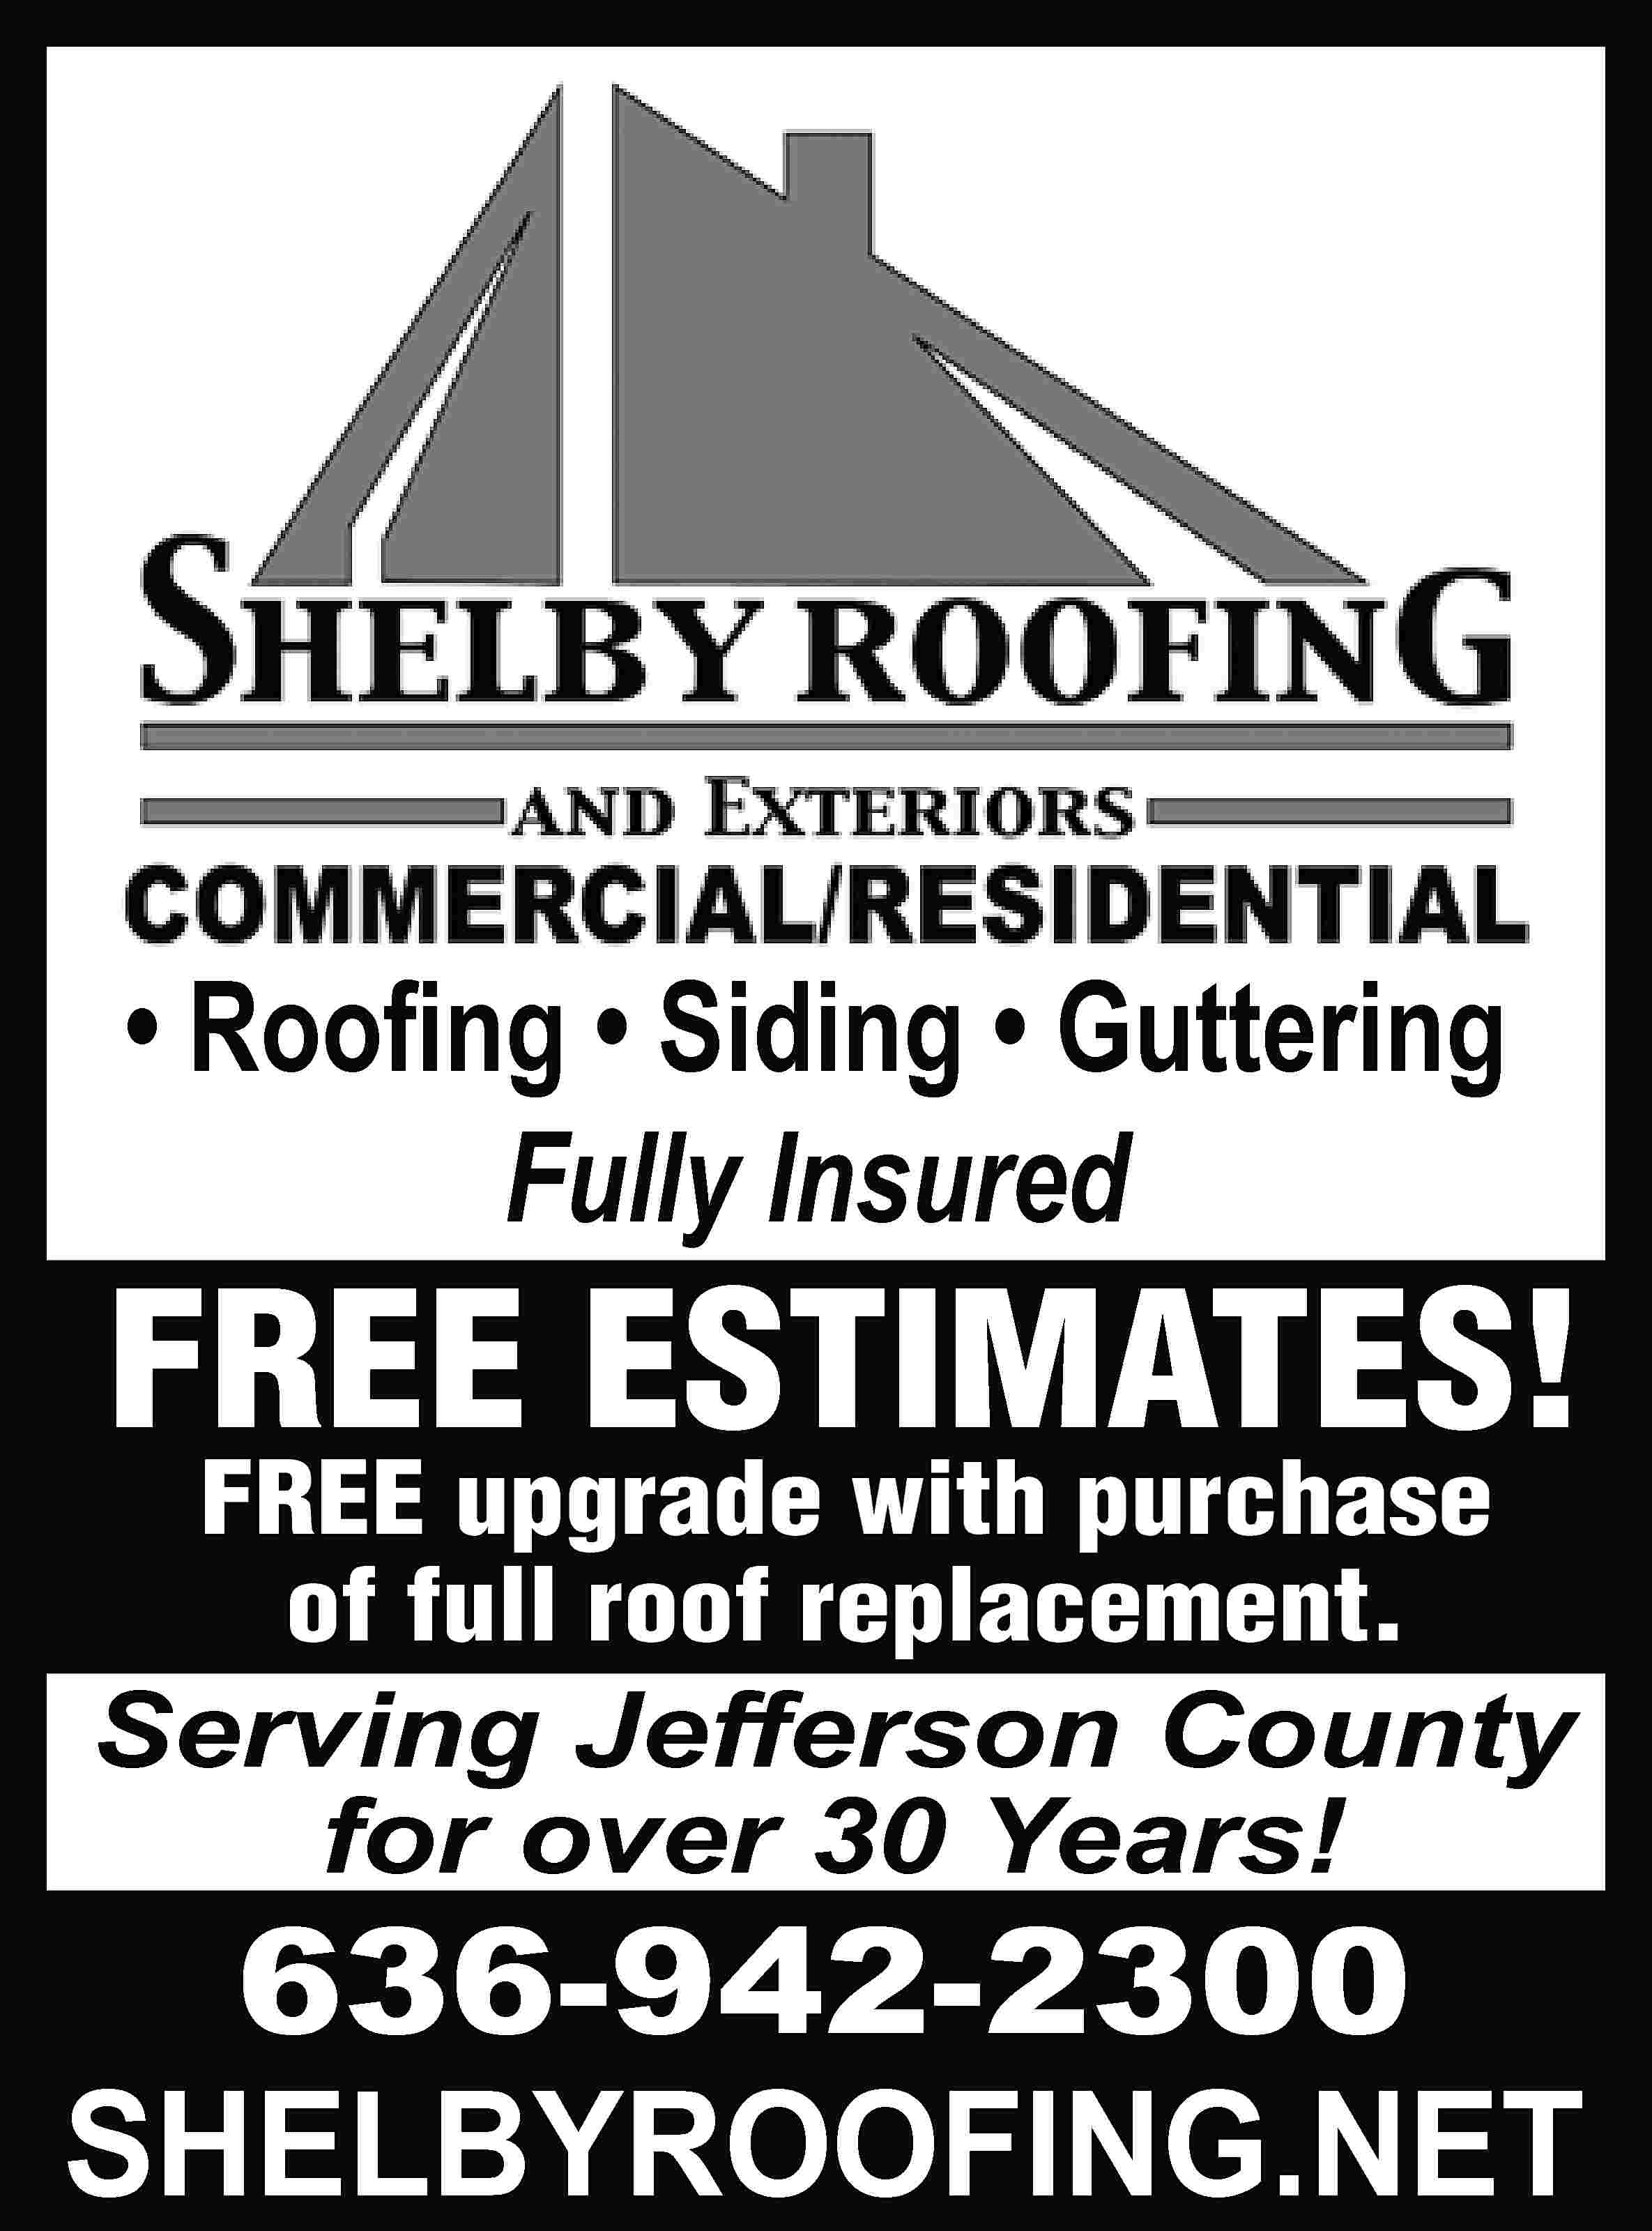 • Rooﬁng • Siding •  • Rooﬁng • Siding • Guttering Fully Insured FREE ESTIMATES! FREE upgrade with purchase of full roof replacement. Serving Jefferson County for over 30 Years! 636-942-2300 SHELBYROOFING.NET